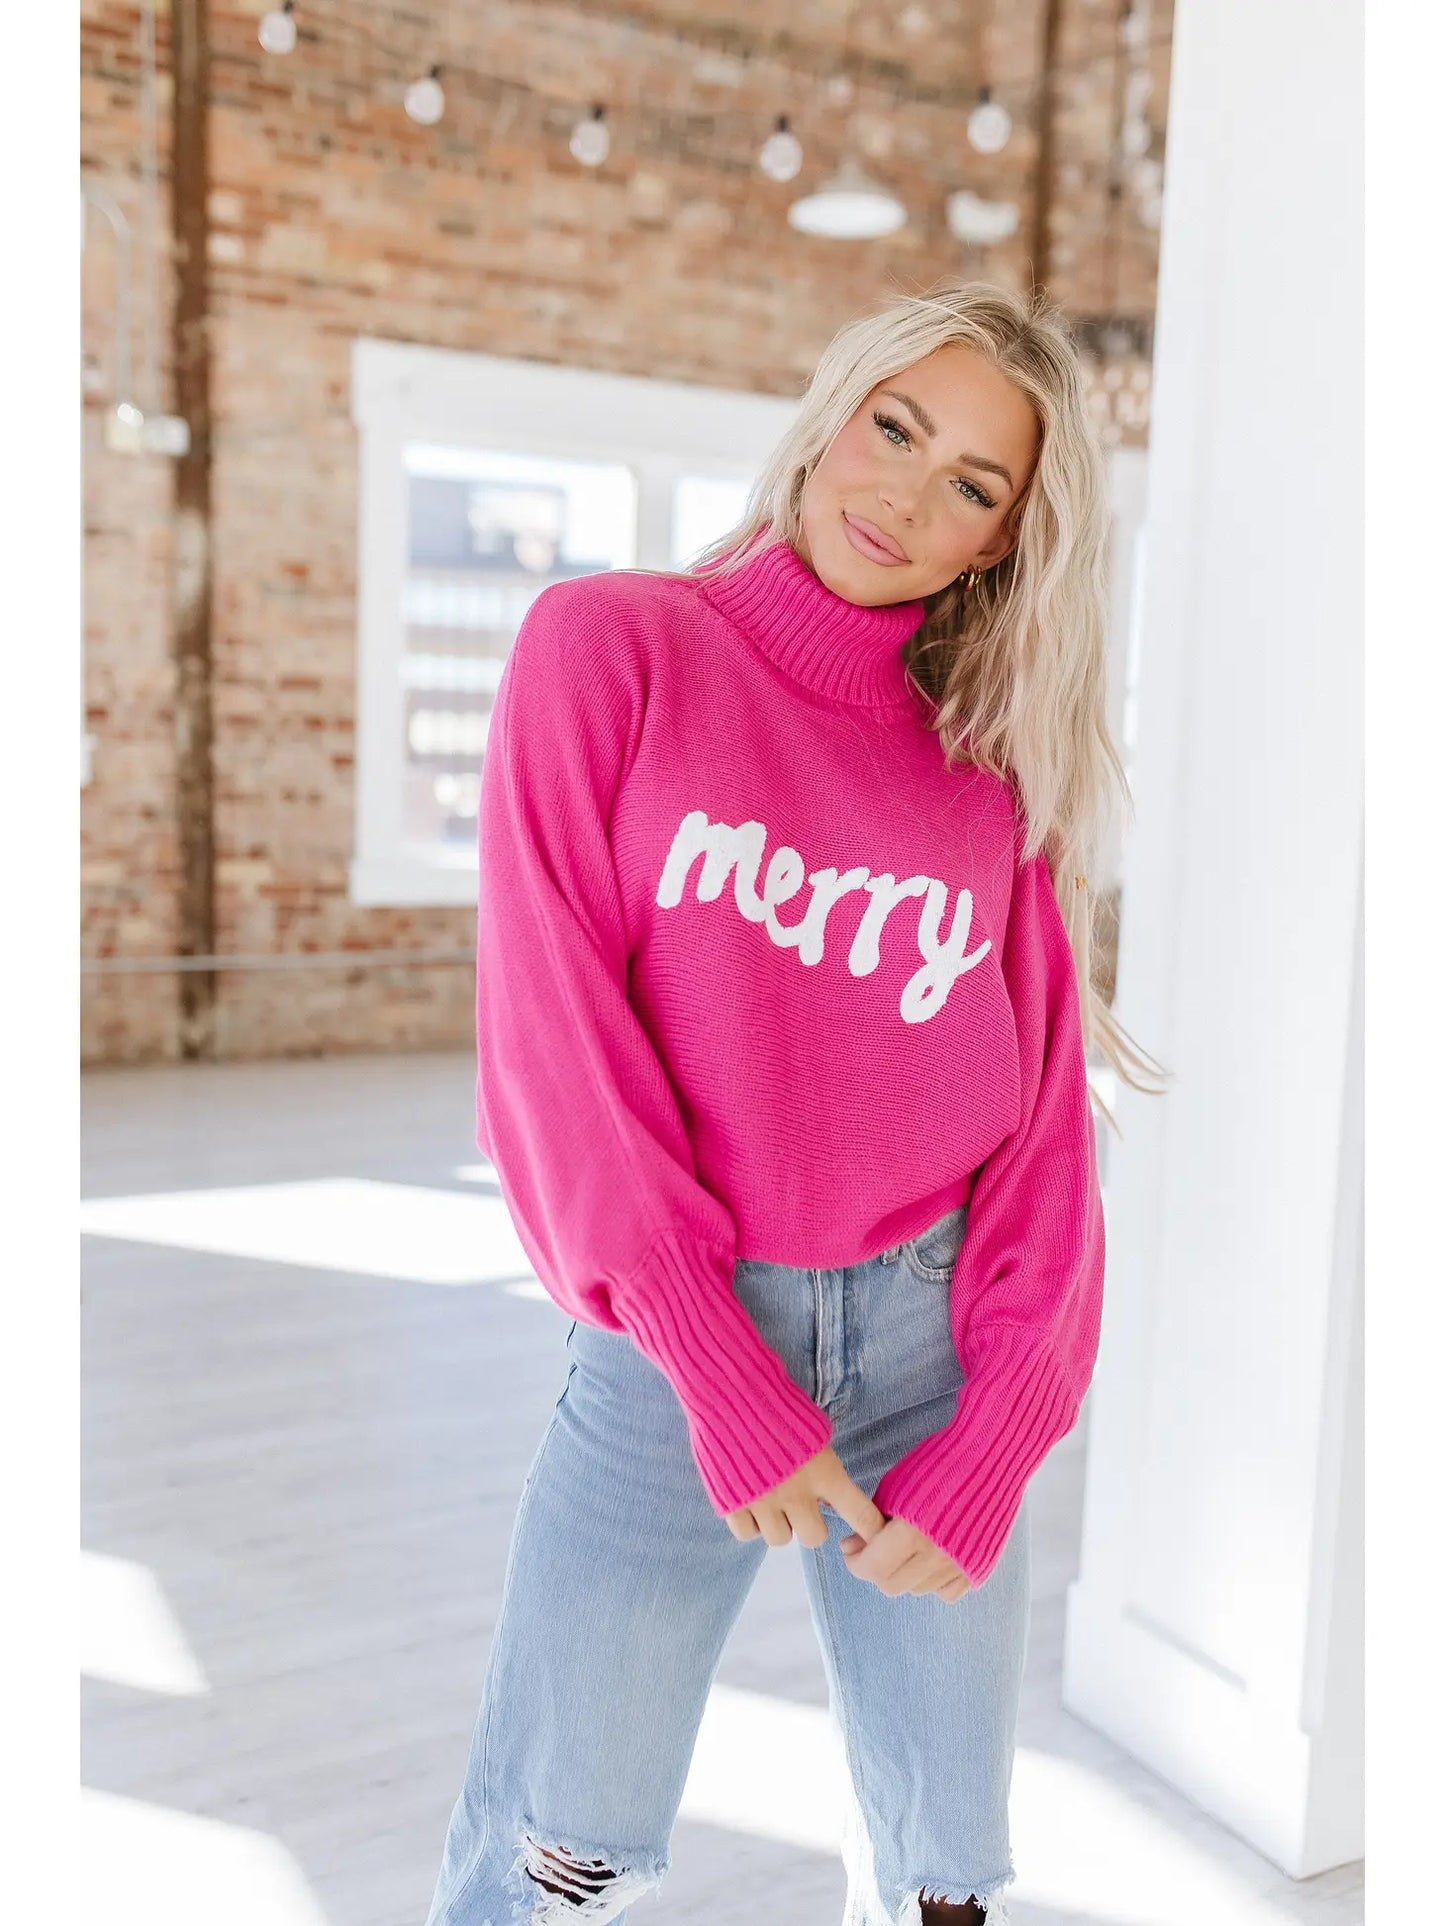 merry sweater in pink